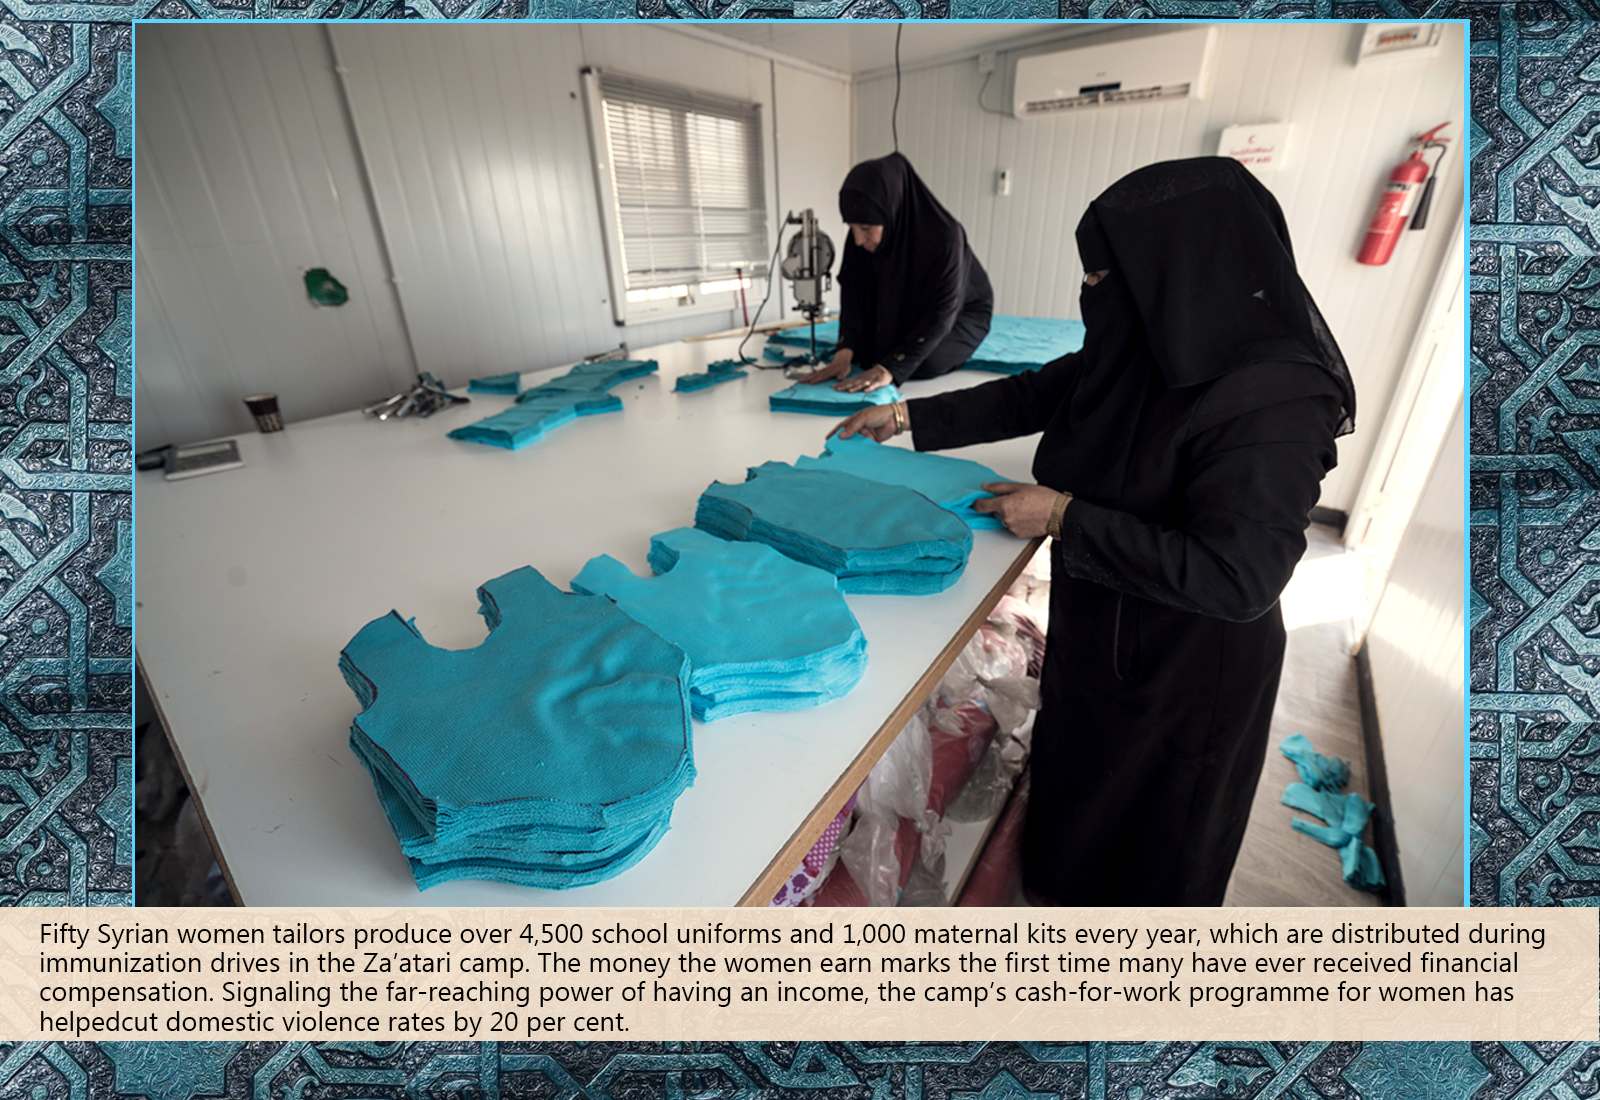 Fifty Syrian women tailors produce over 4,500 school uniforms and 1,000 maternal kits every year.